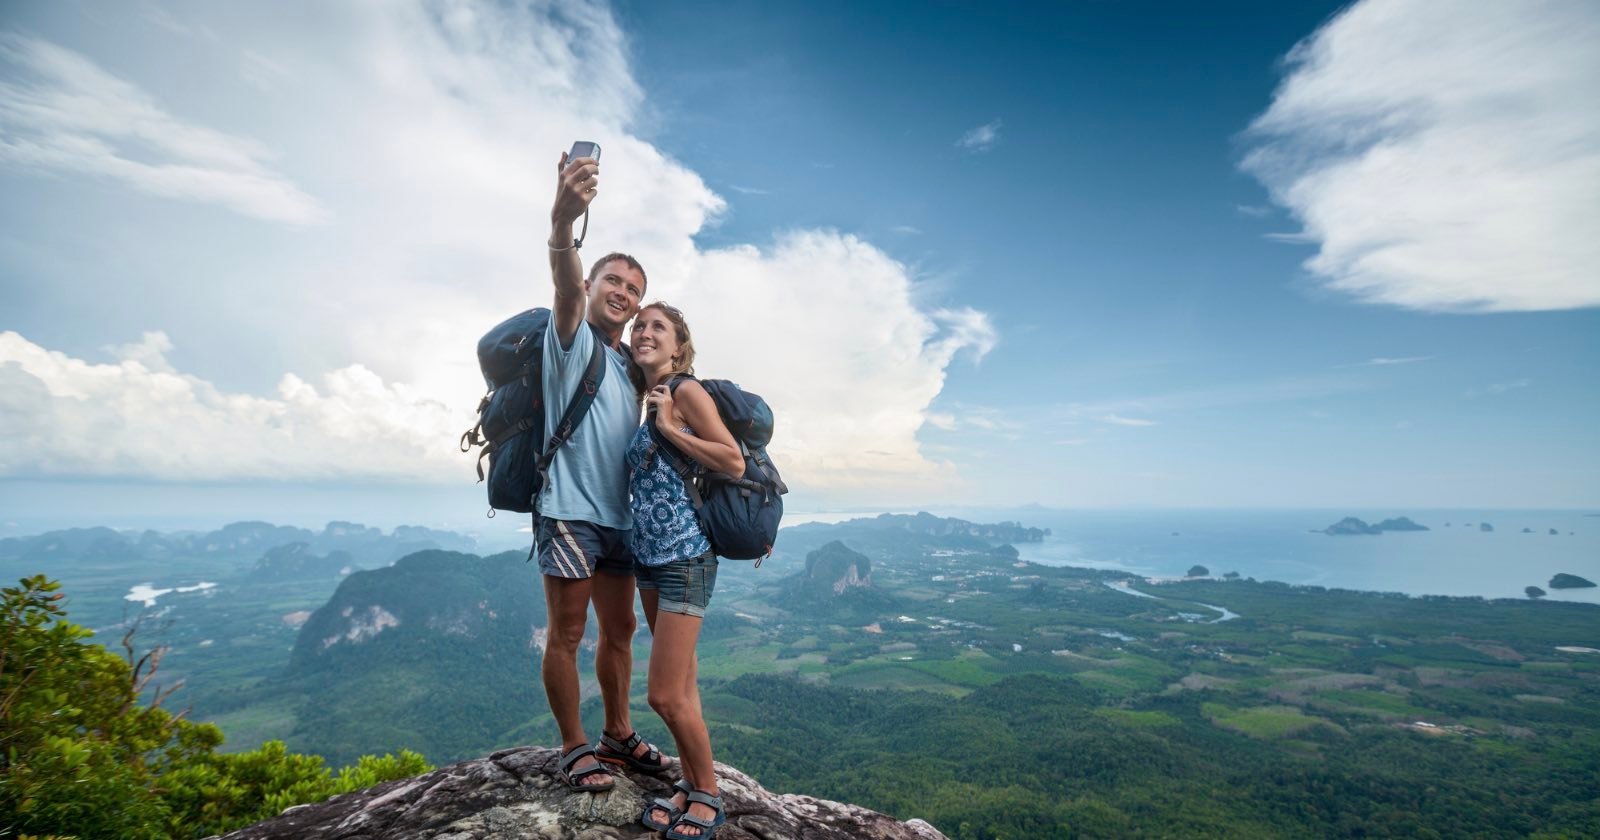 Selfie-Related Deaths are Public Health Risk in Age of Social Media